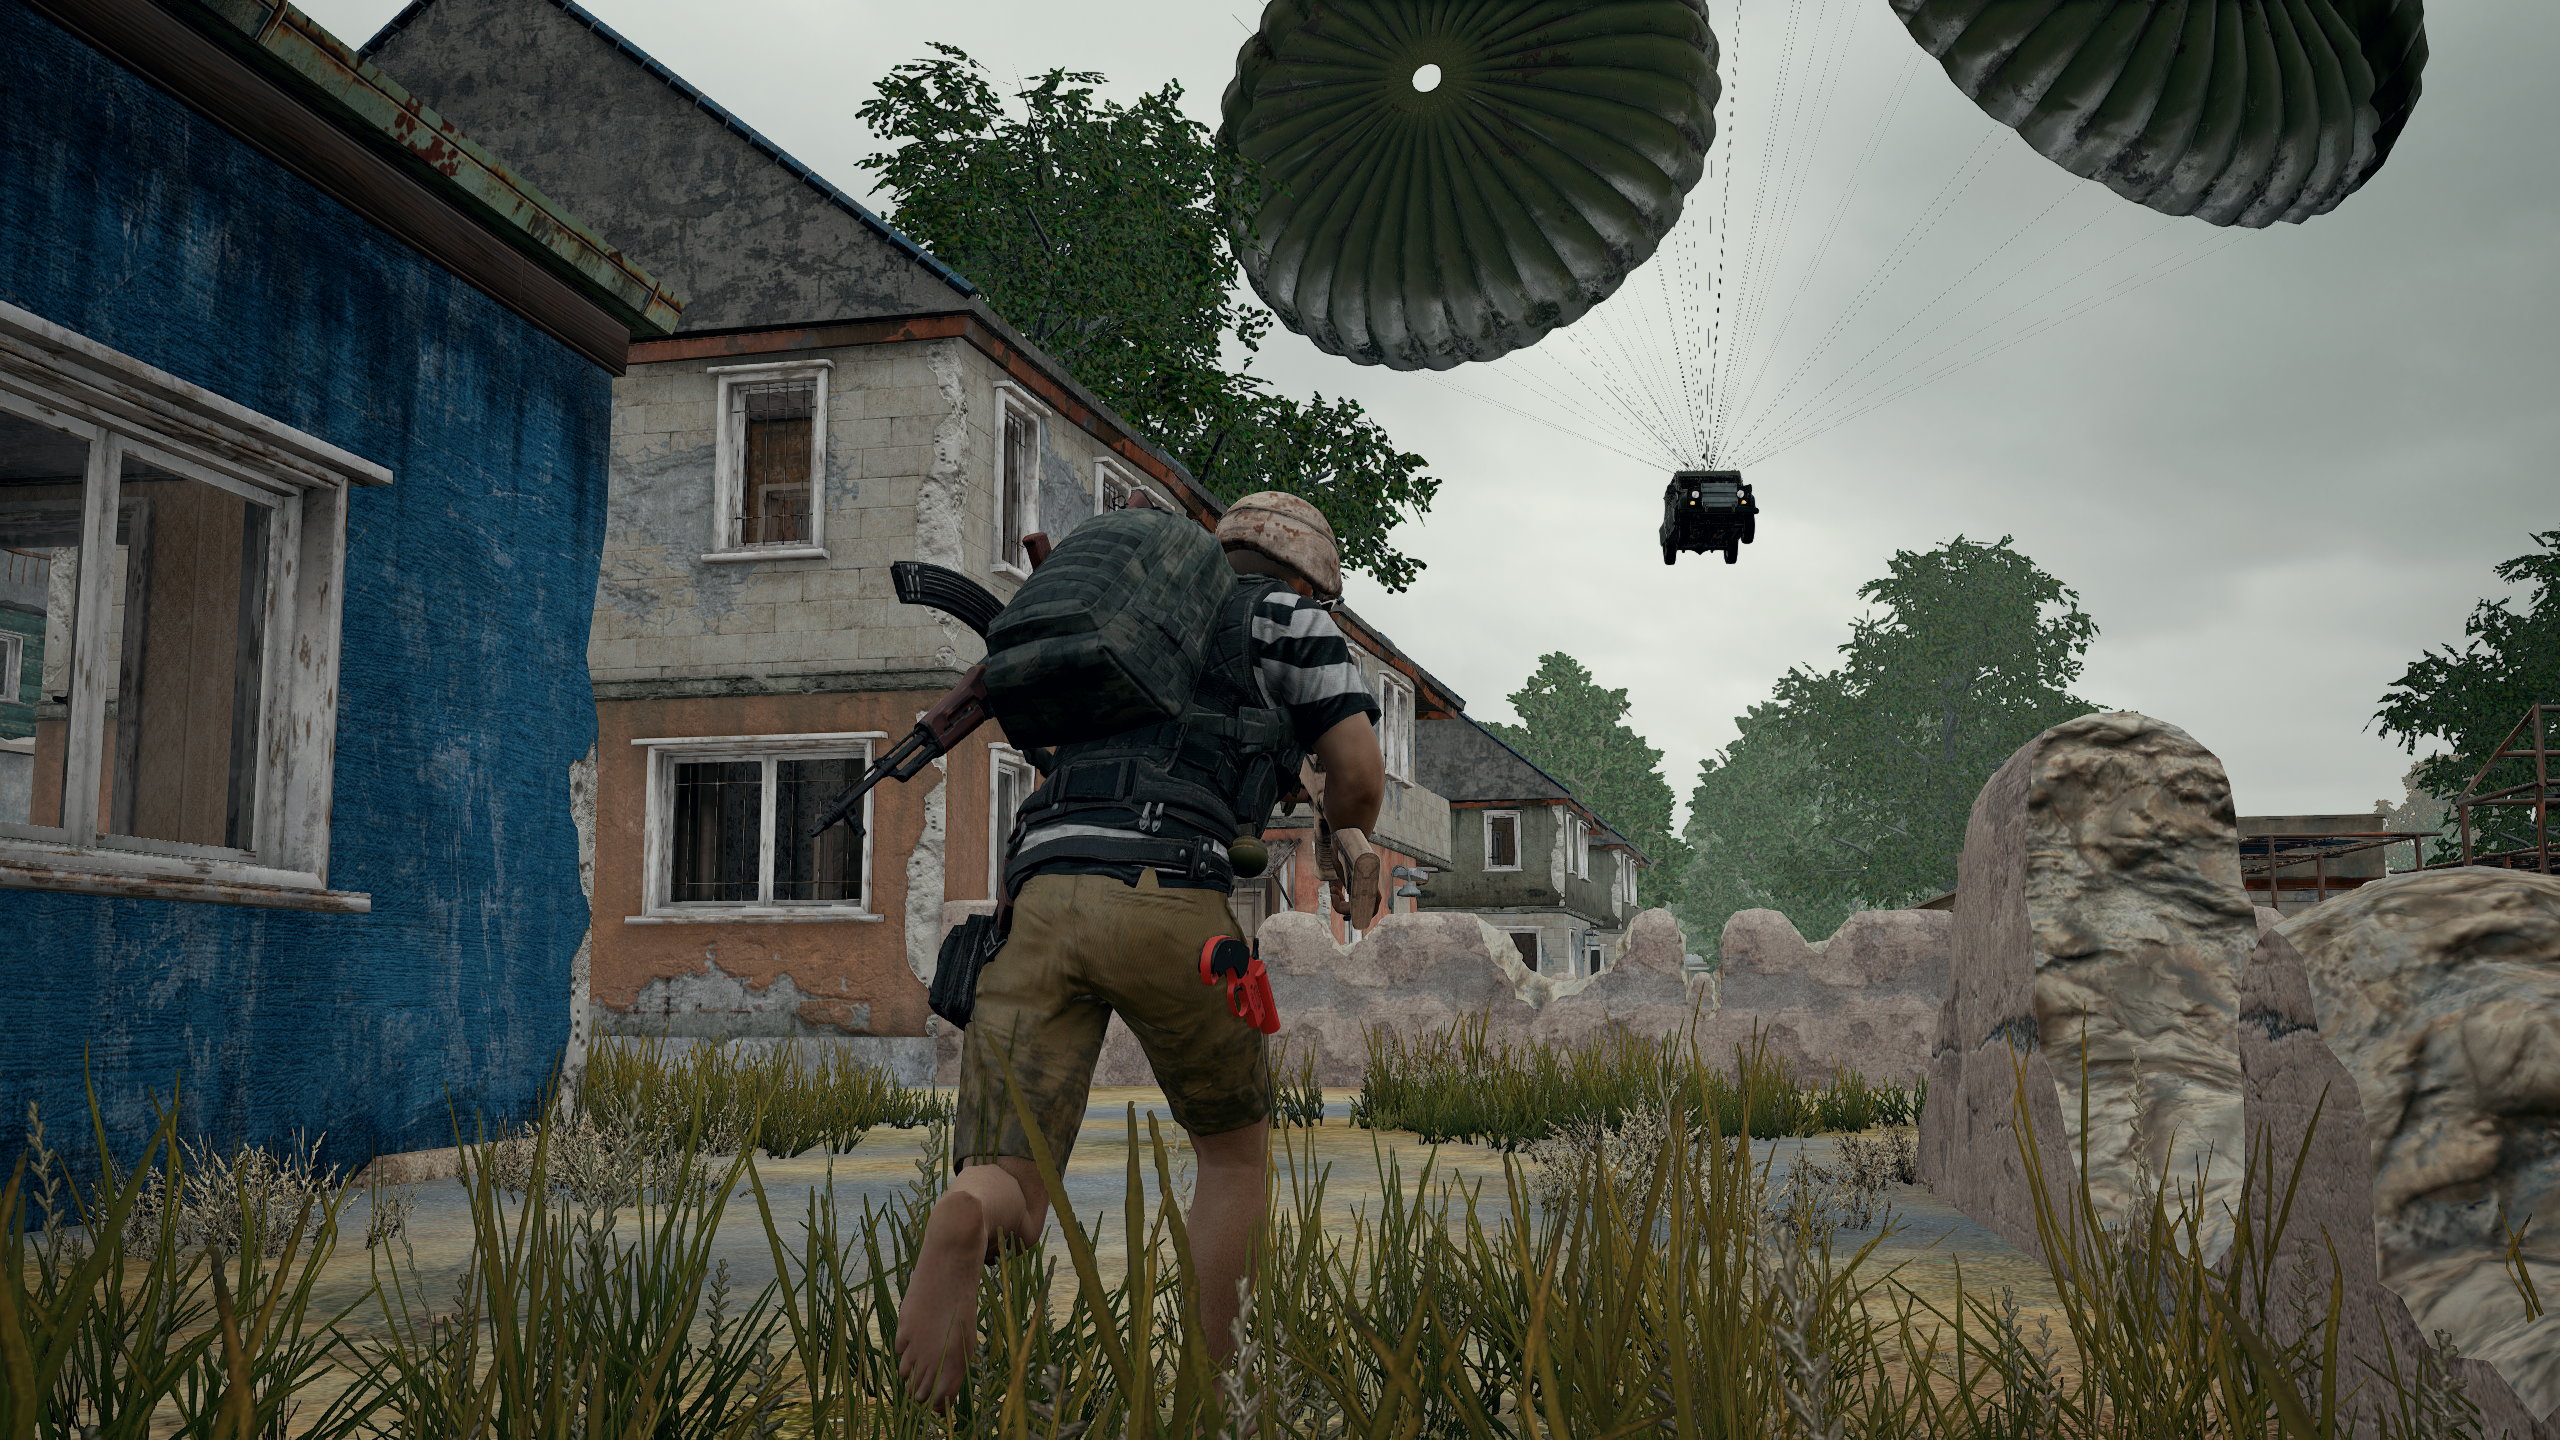 player unknown battlegrounds pc cant join game